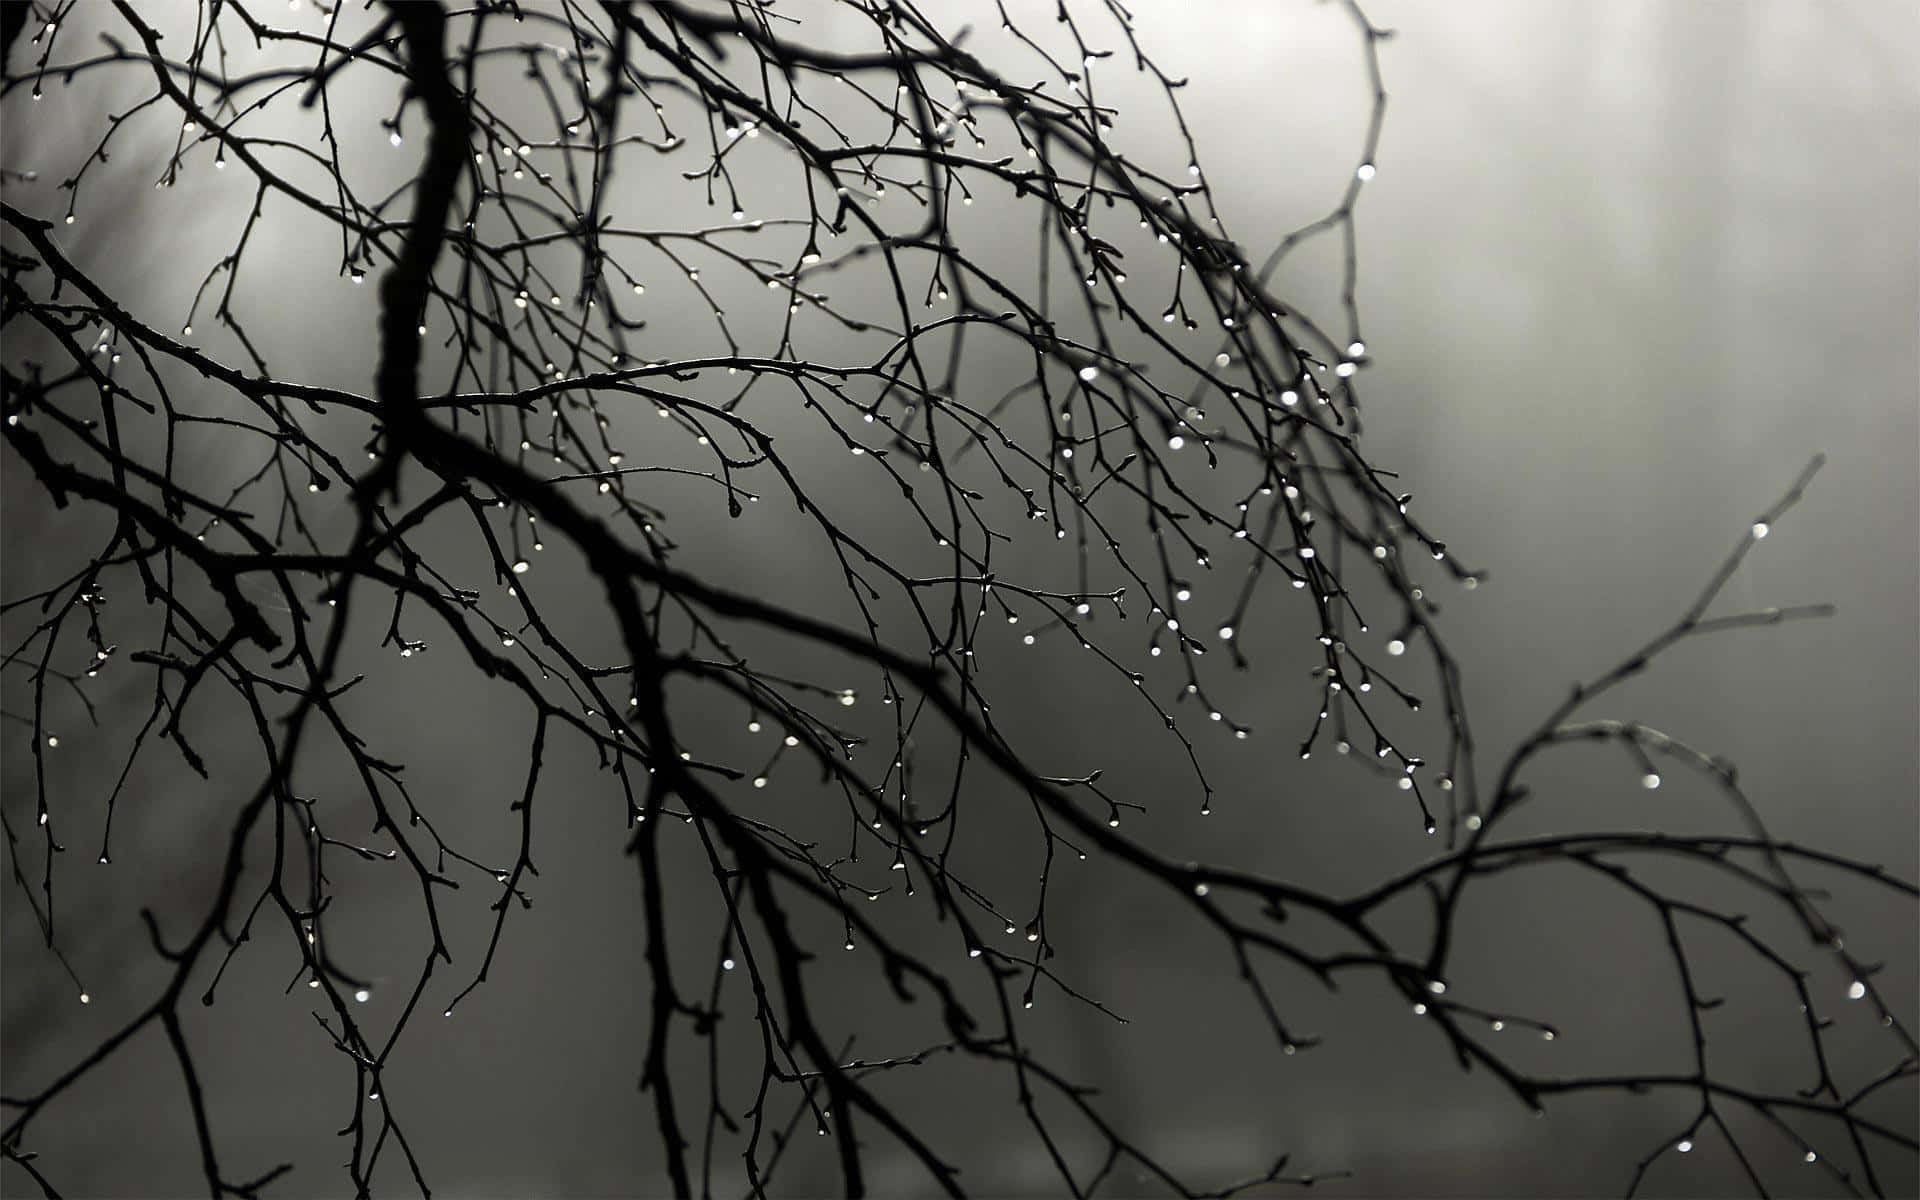 A natural reflection in droplets of rain